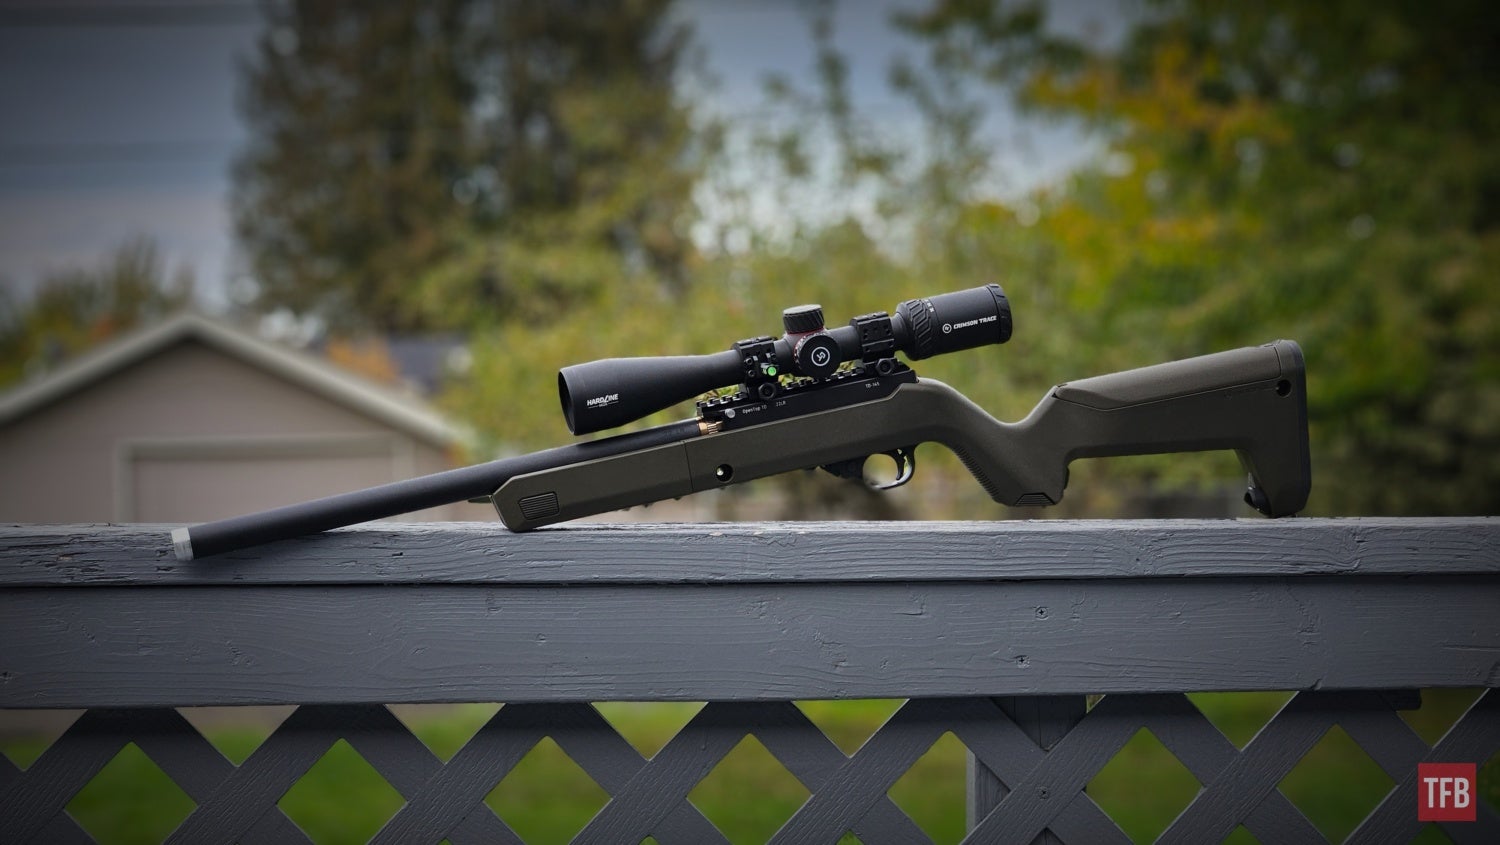 The Rimfire Report: The Fletcher Rifle Works OpenTop Takedown Rifle